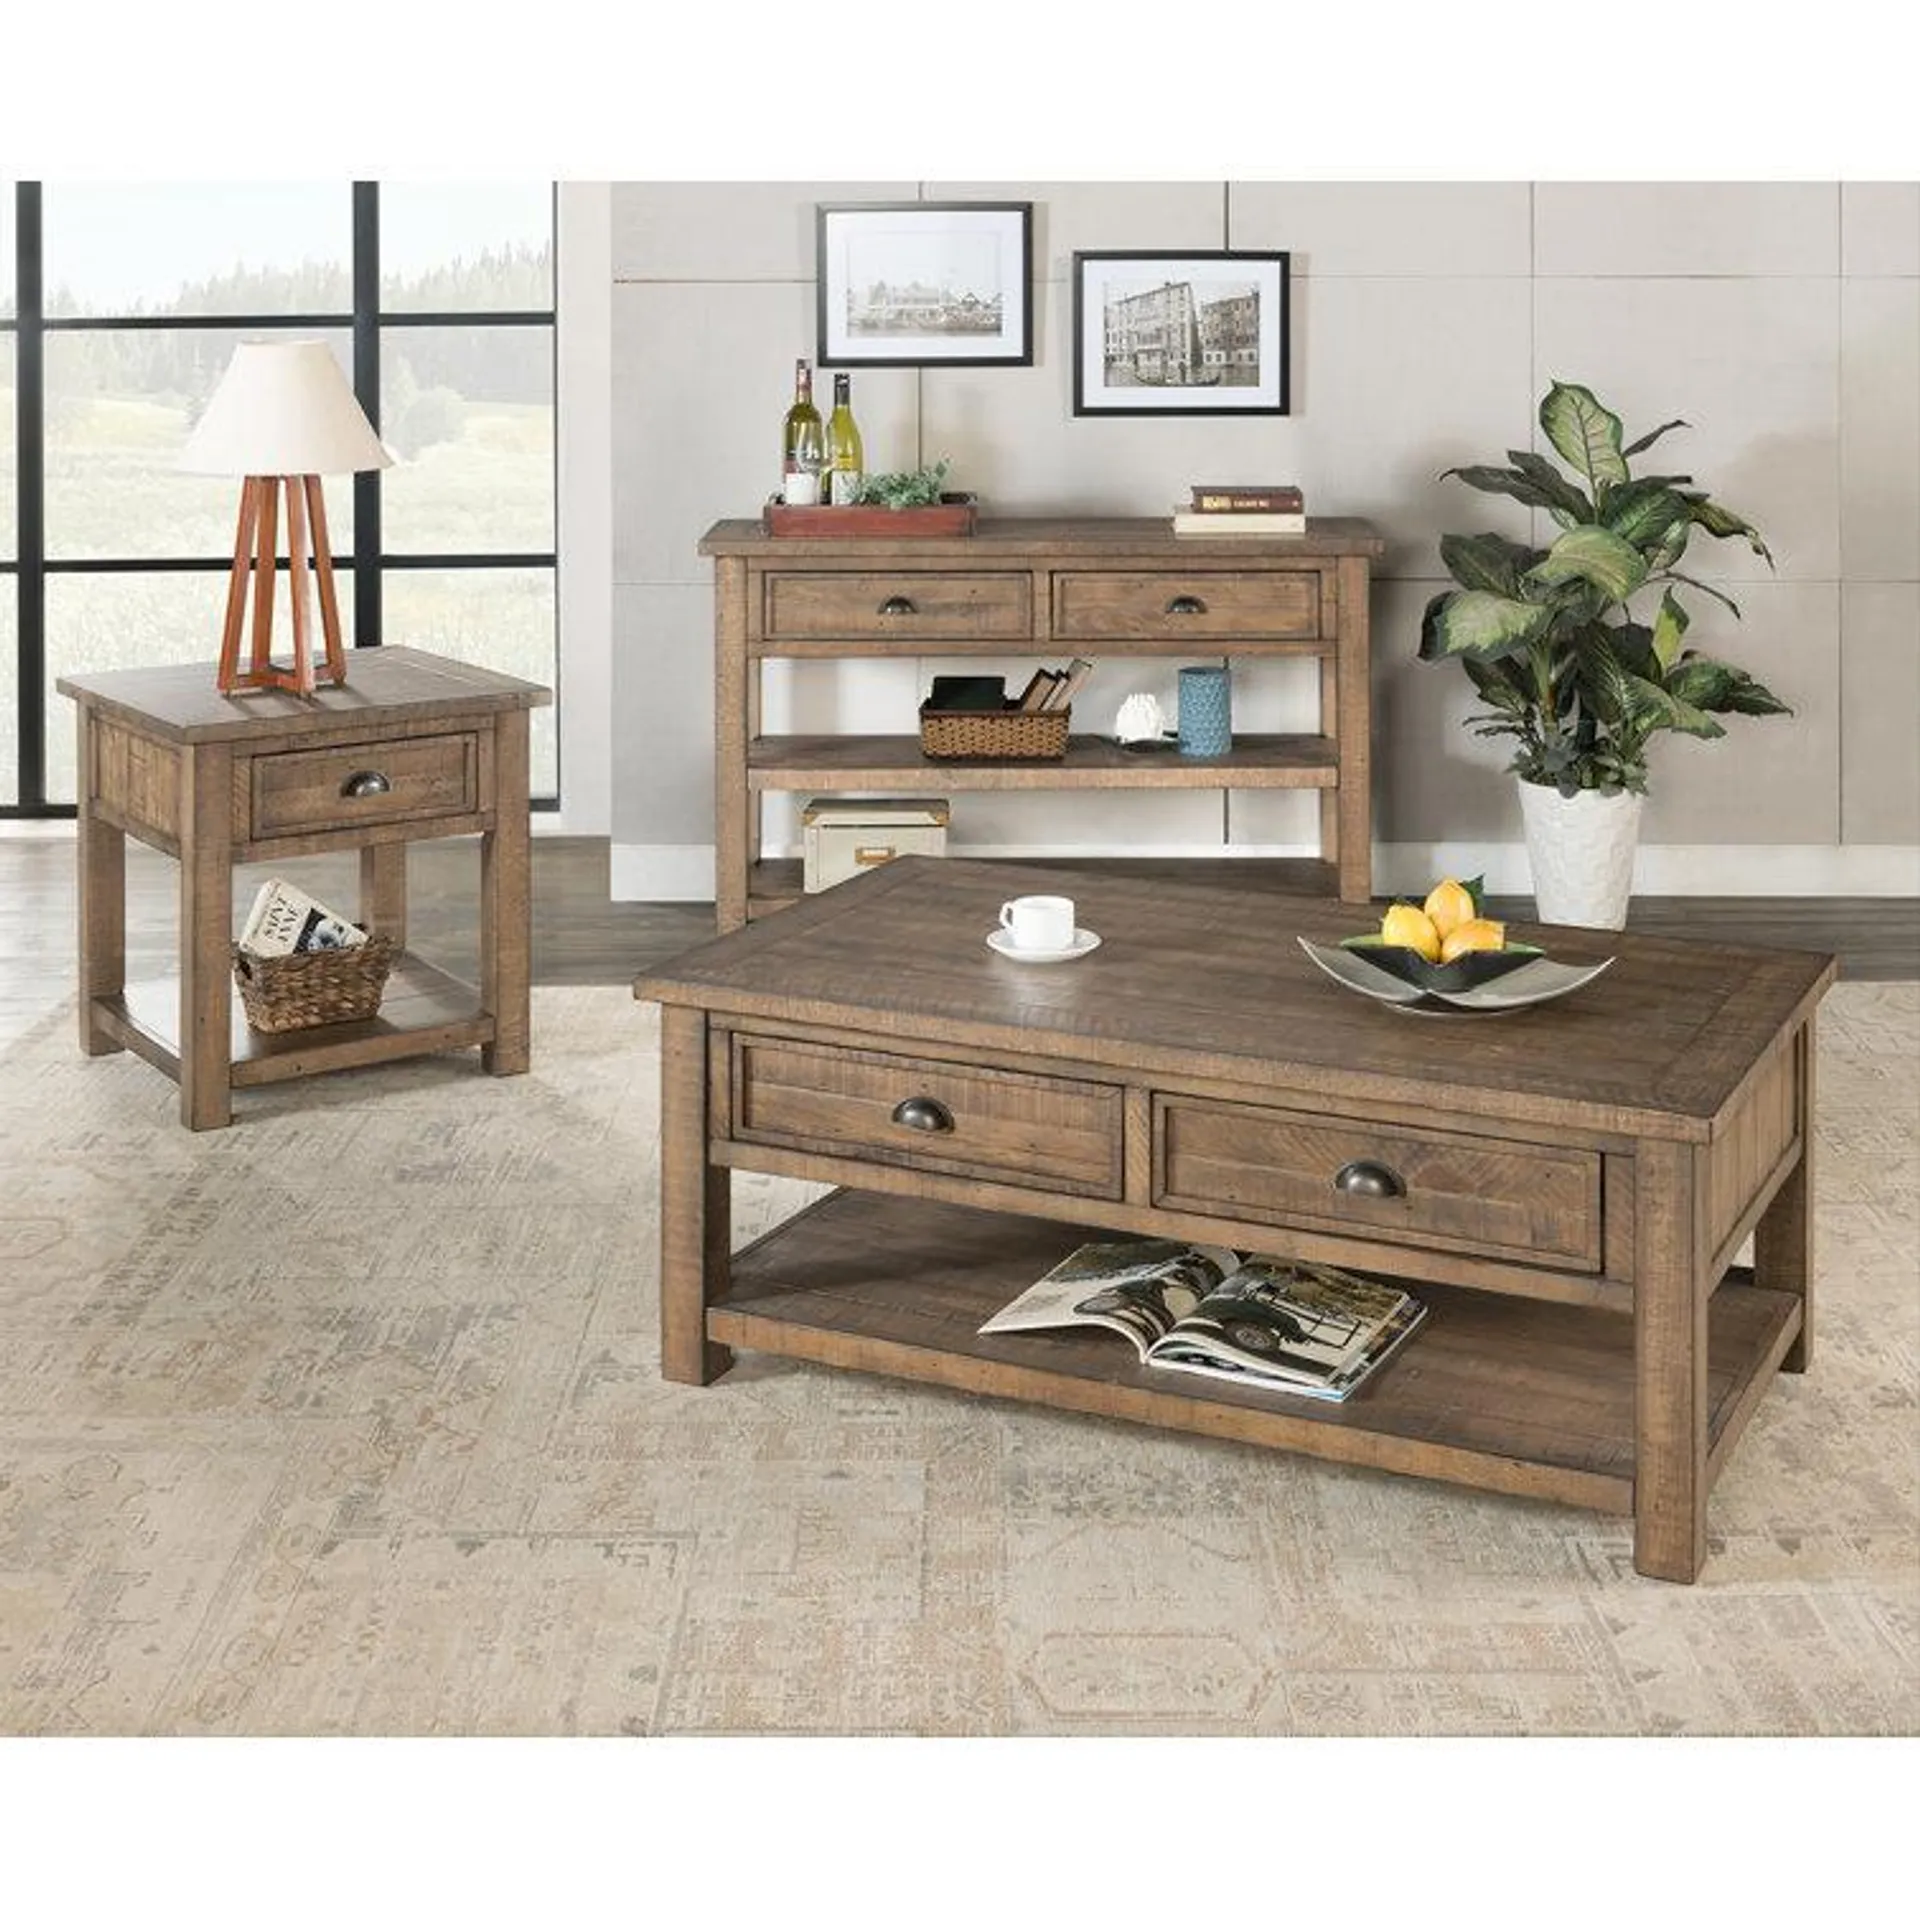 Holliman 3 Piece Solid Wood Coffee Table Set